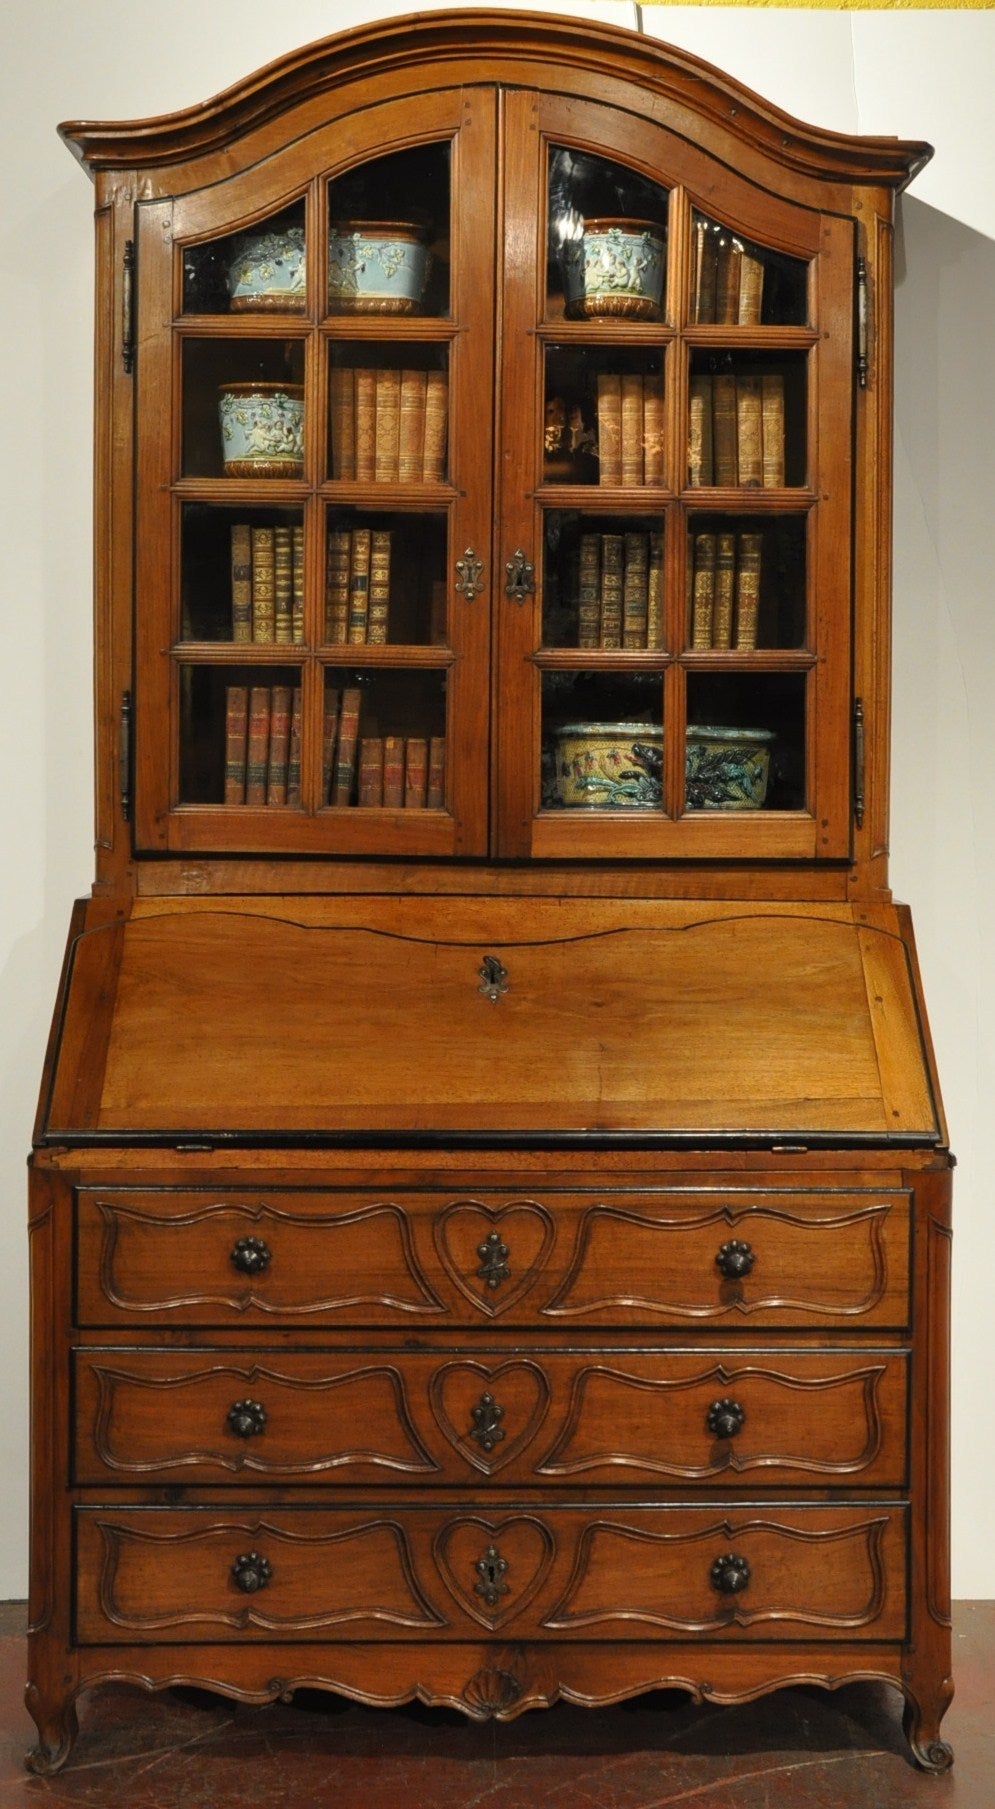 Useful and beautiful, this elegant antique fruitwood 